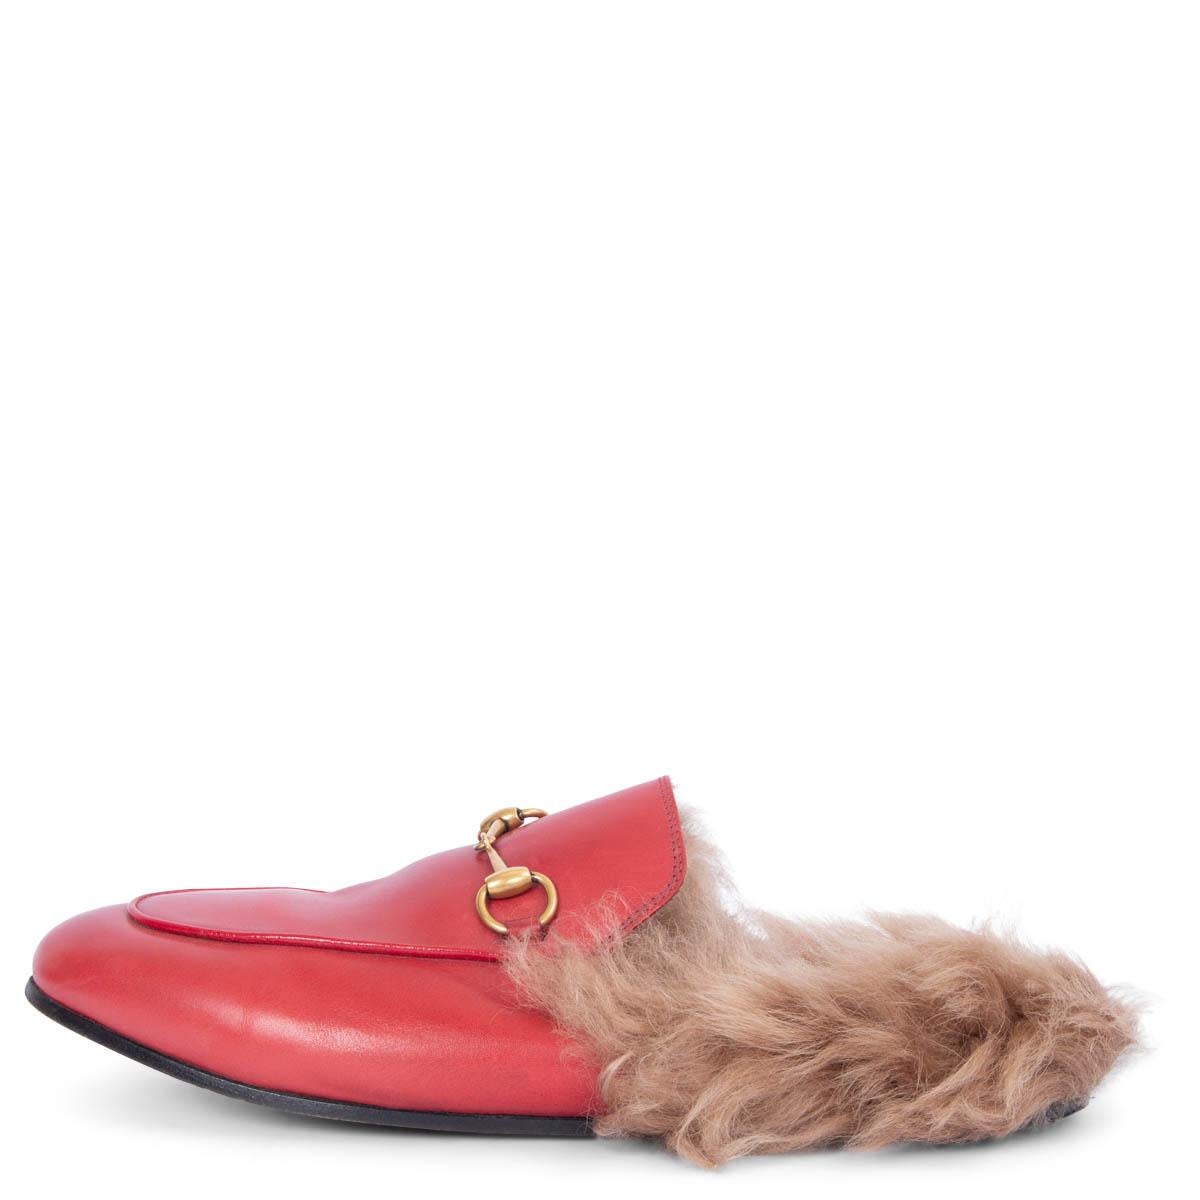 Women's GUCCI red leather FUR TRIM PRINCETOWN Slippers Flats Shoes 38